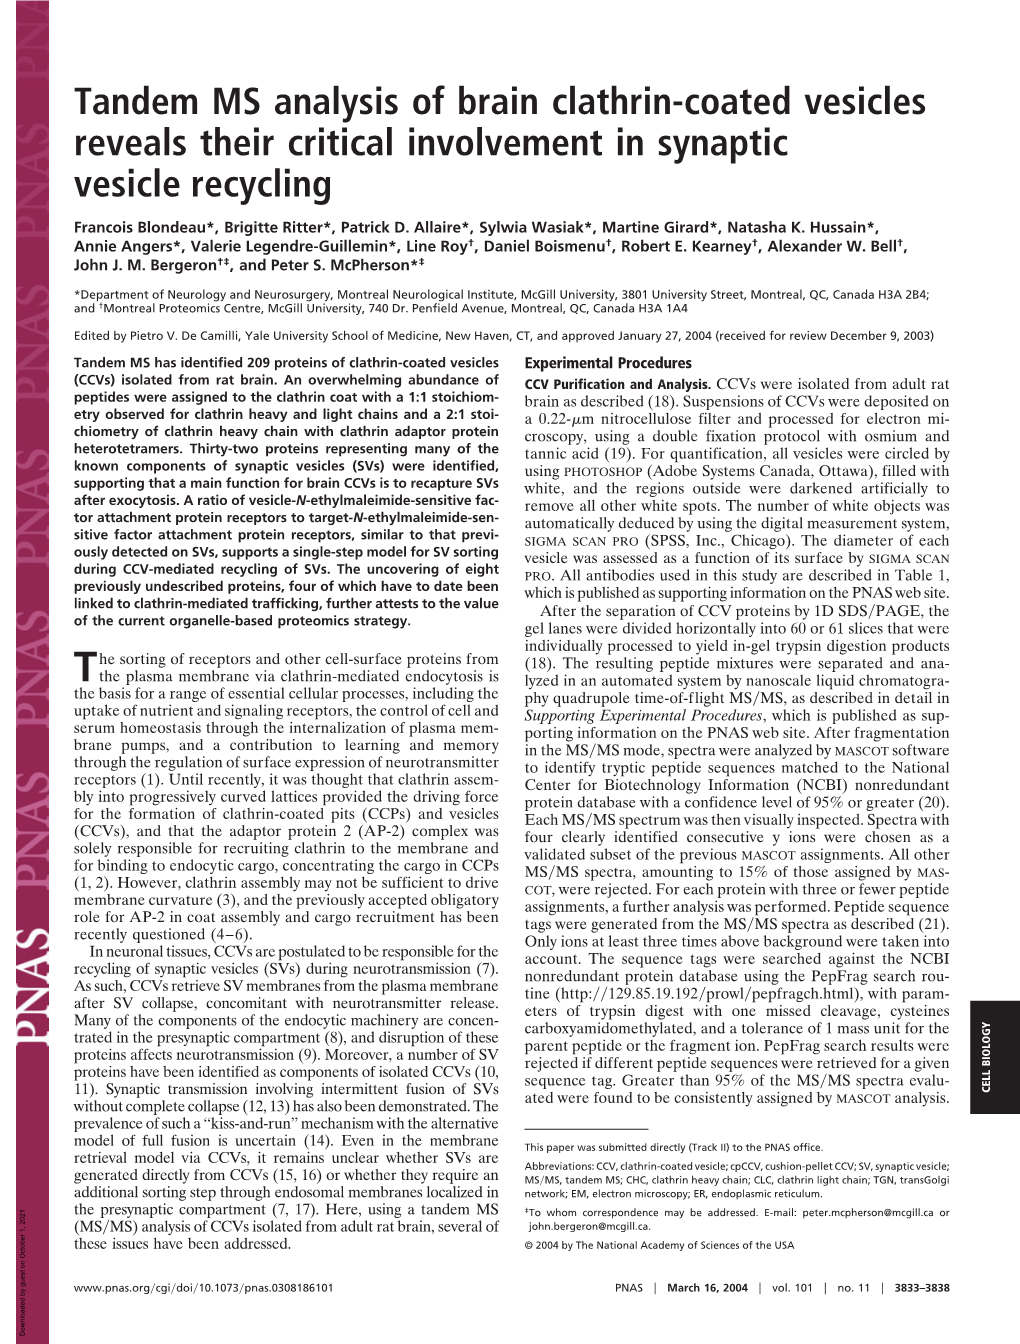 Tandem MS Analysis of Brain Clathrin-Coated Vesicles Reveals Their Critical Involvement in Synaptic Vesicle Recycling